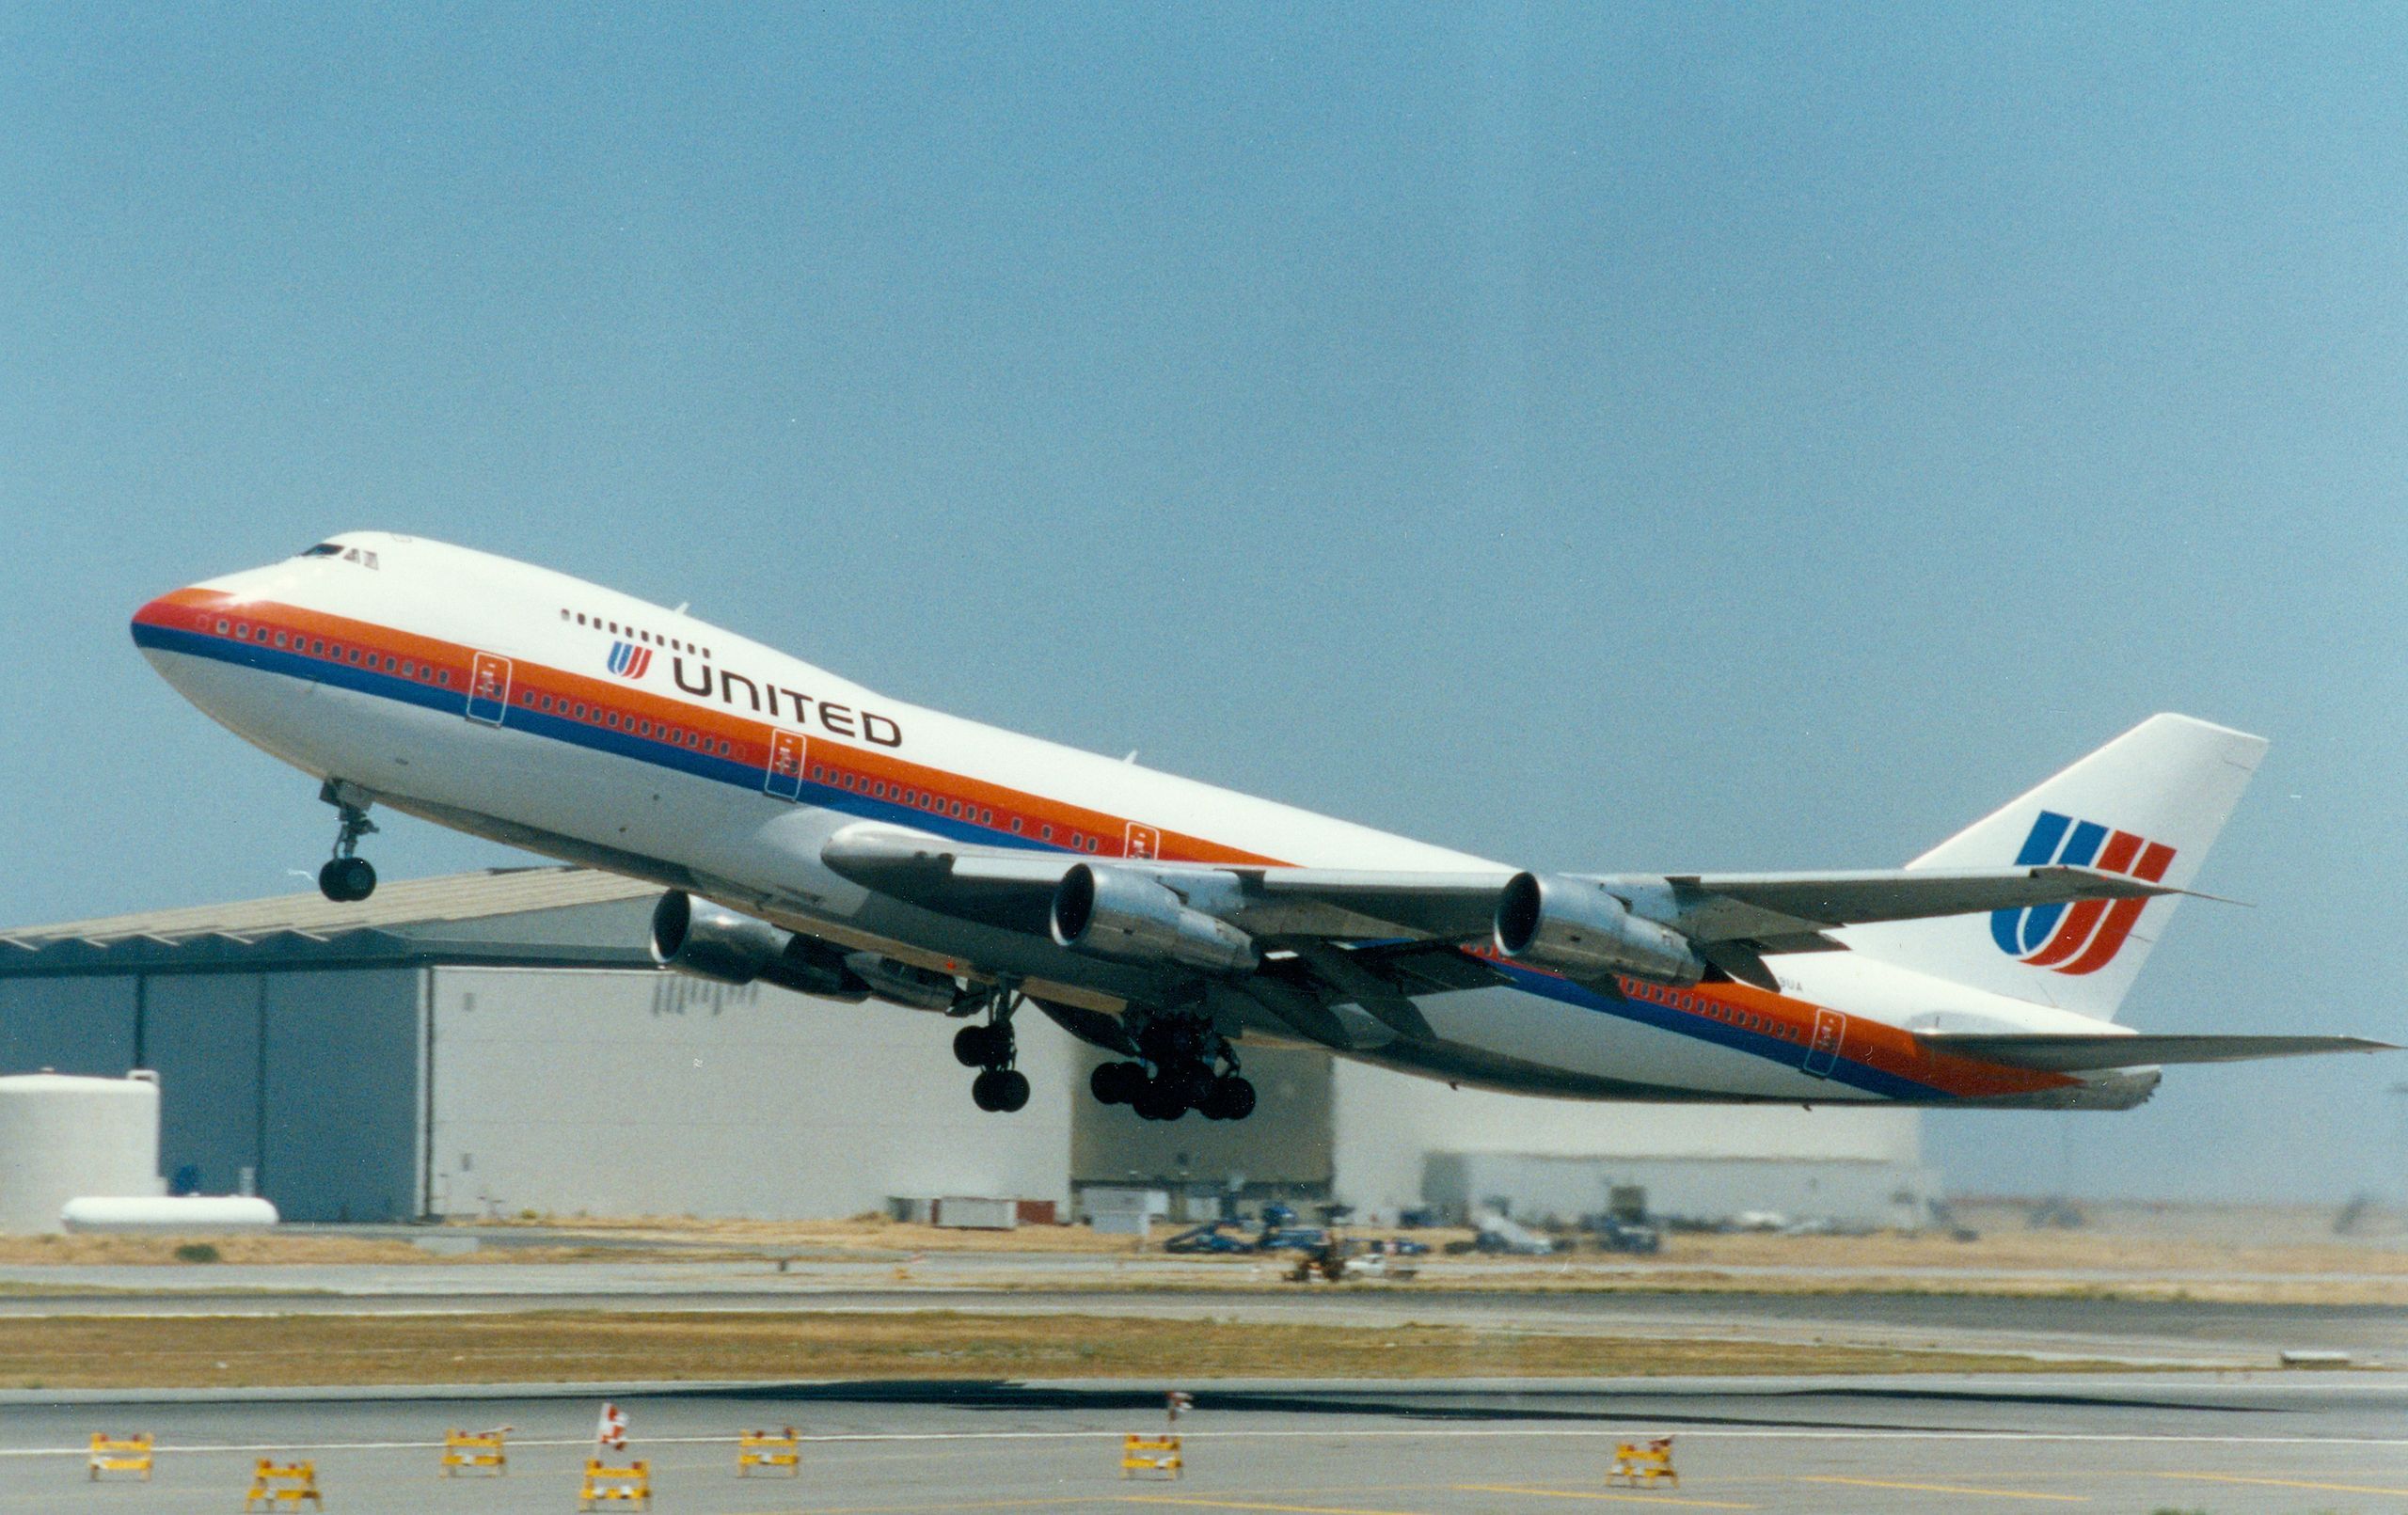 A United Airlines Boeing 747-200 taking off.